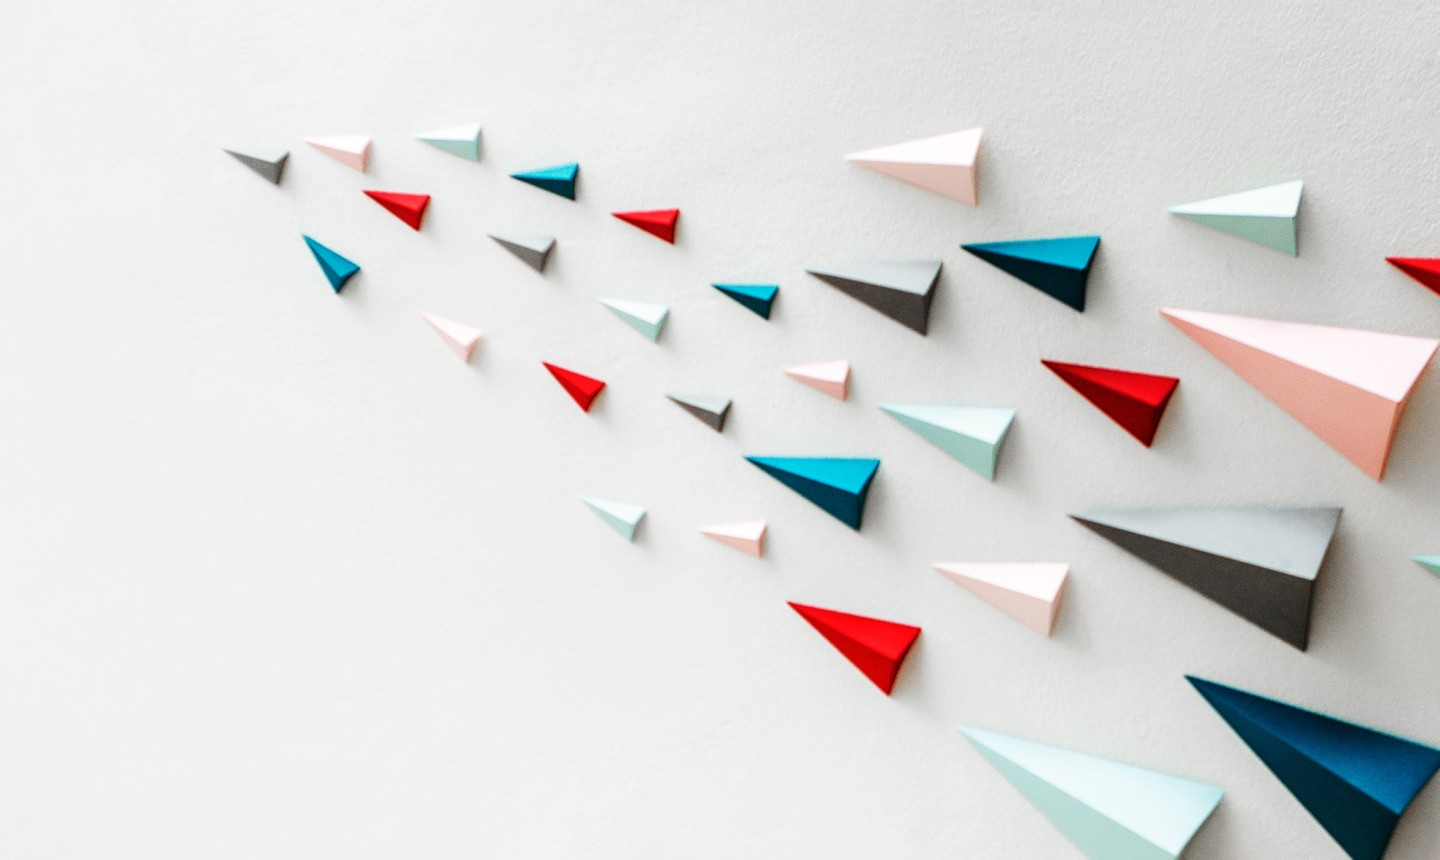 Origami Origami Origami Transform Your Boring Walls With The Magic Of Origami